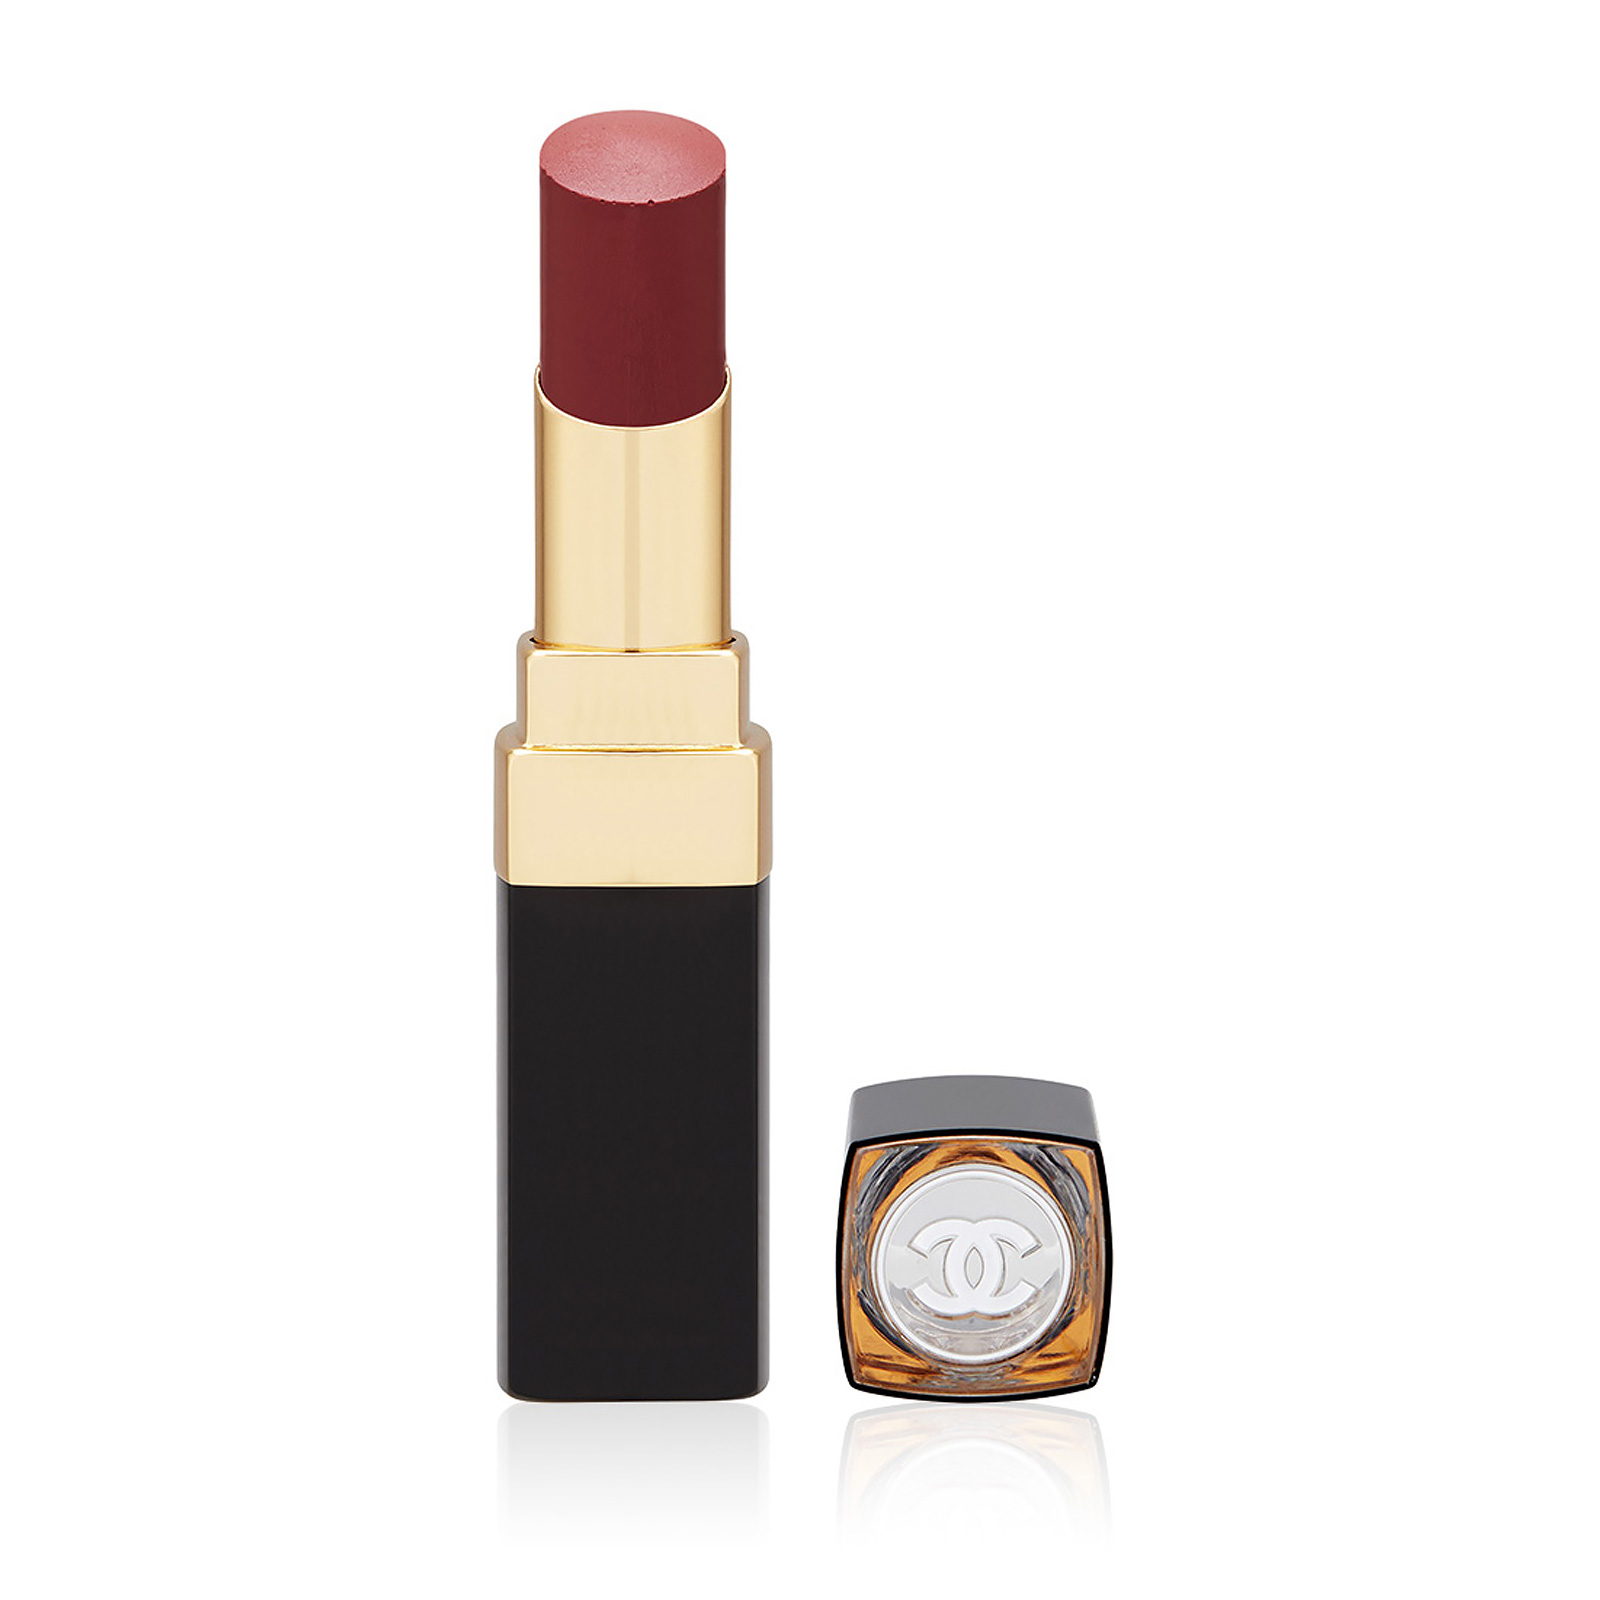 Chanel Rouge Coco Flash Hydrating Vibrant Shine Lip Colour3 g 0.1 oz AKB  Beauty